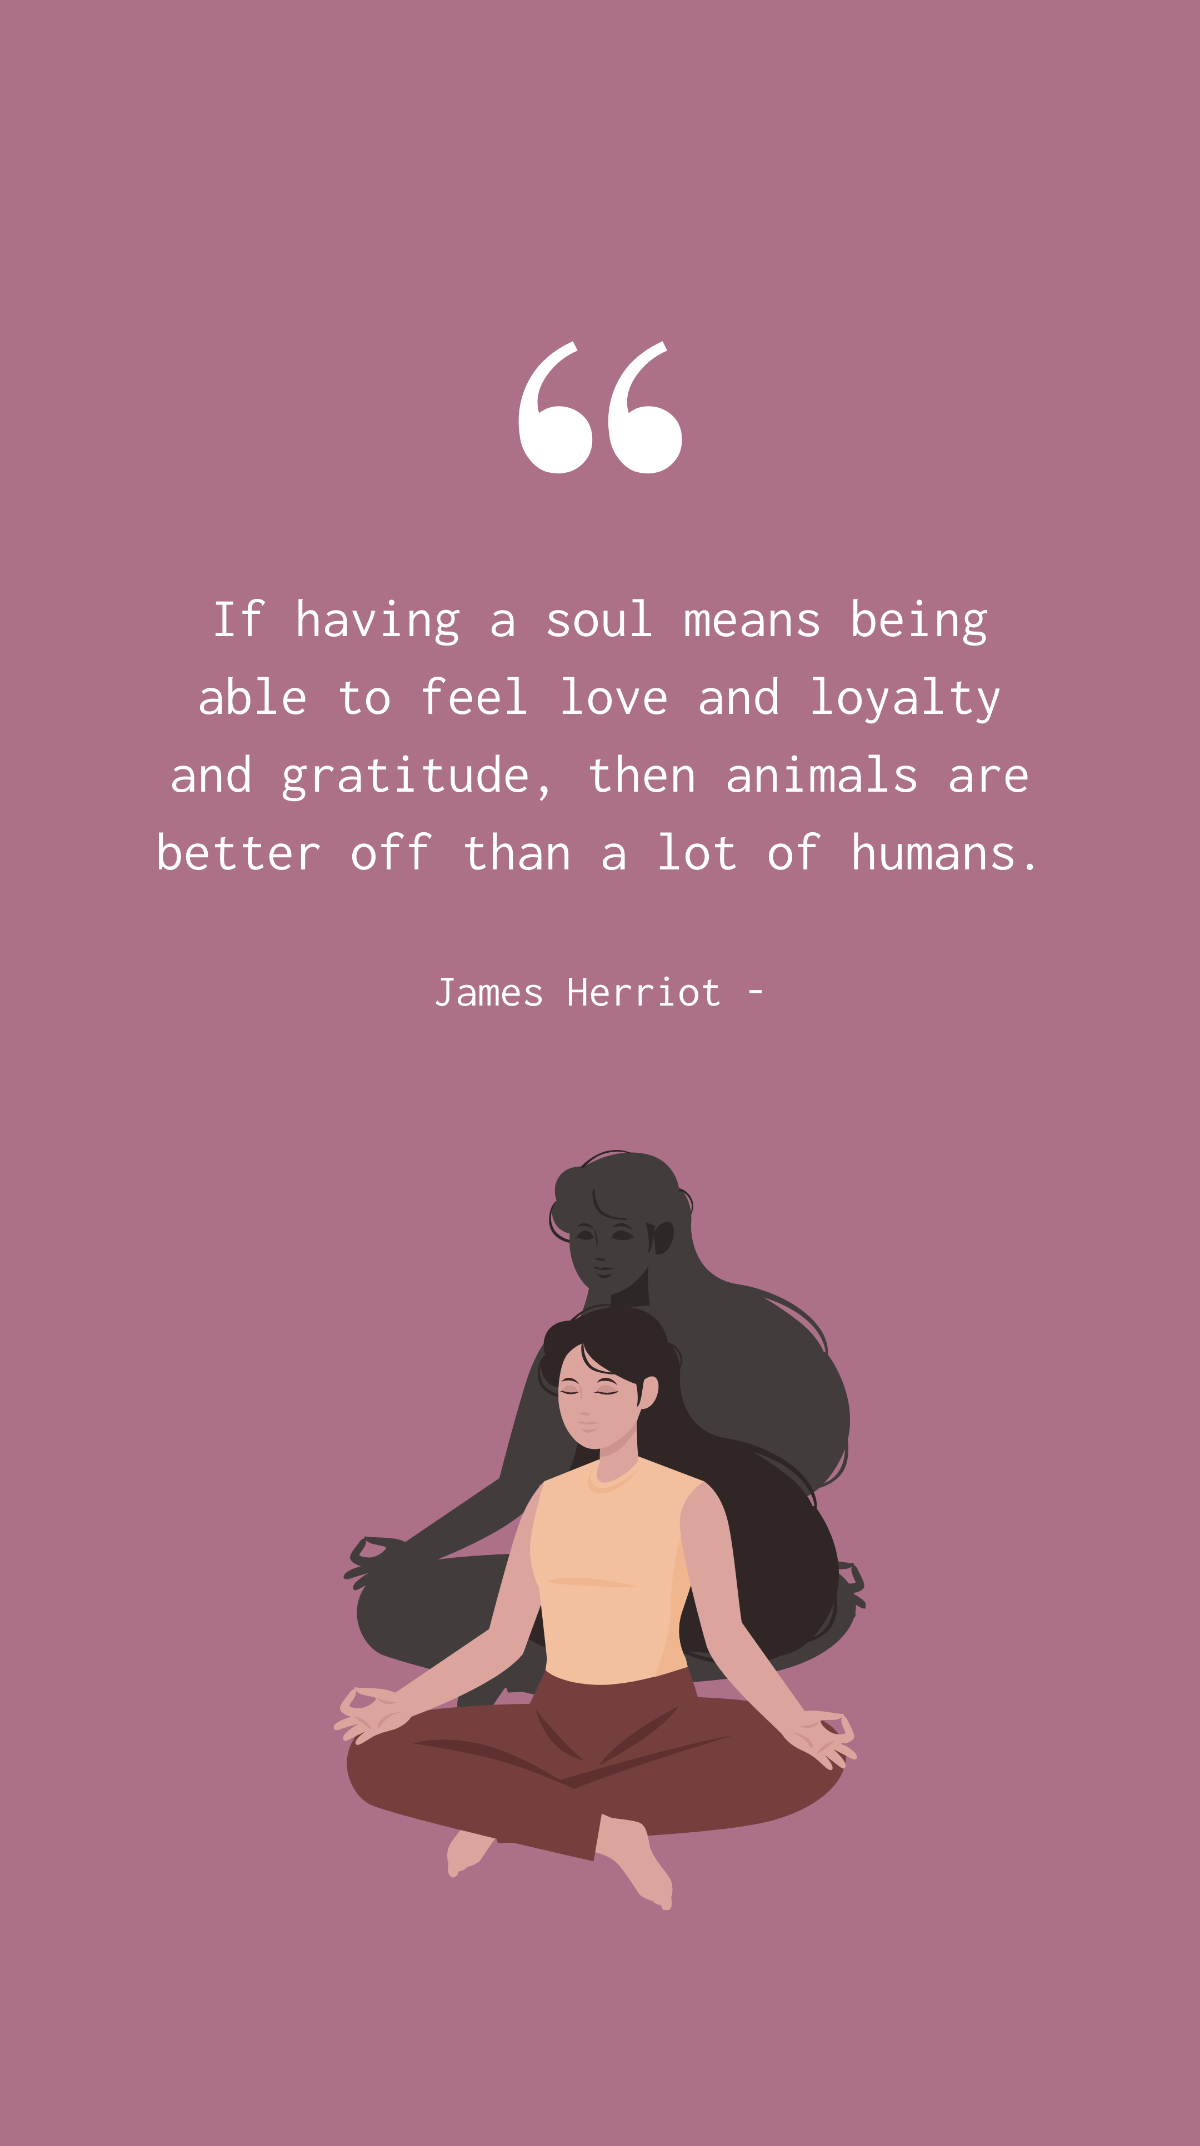 Free James Herriot - If having a soul means being able to feel love and loyalty and gratitude, then animals are better off than a lot of humans. Template